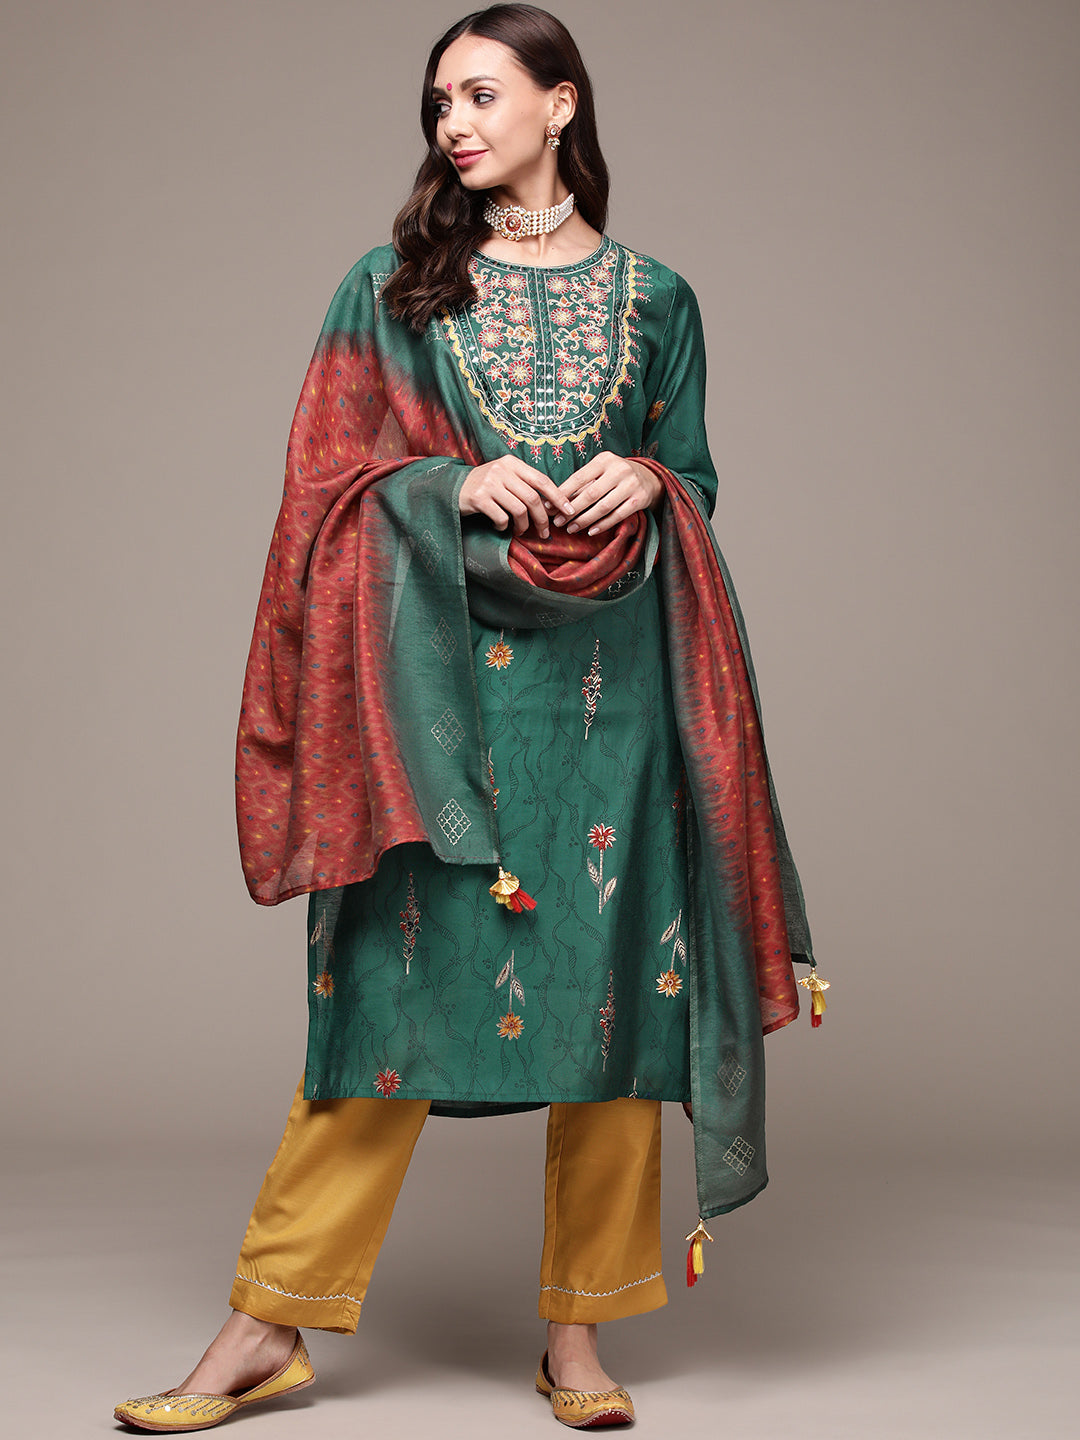 Women's Bottle Green Embroidered Kurta Set with Trousers and Dupatta